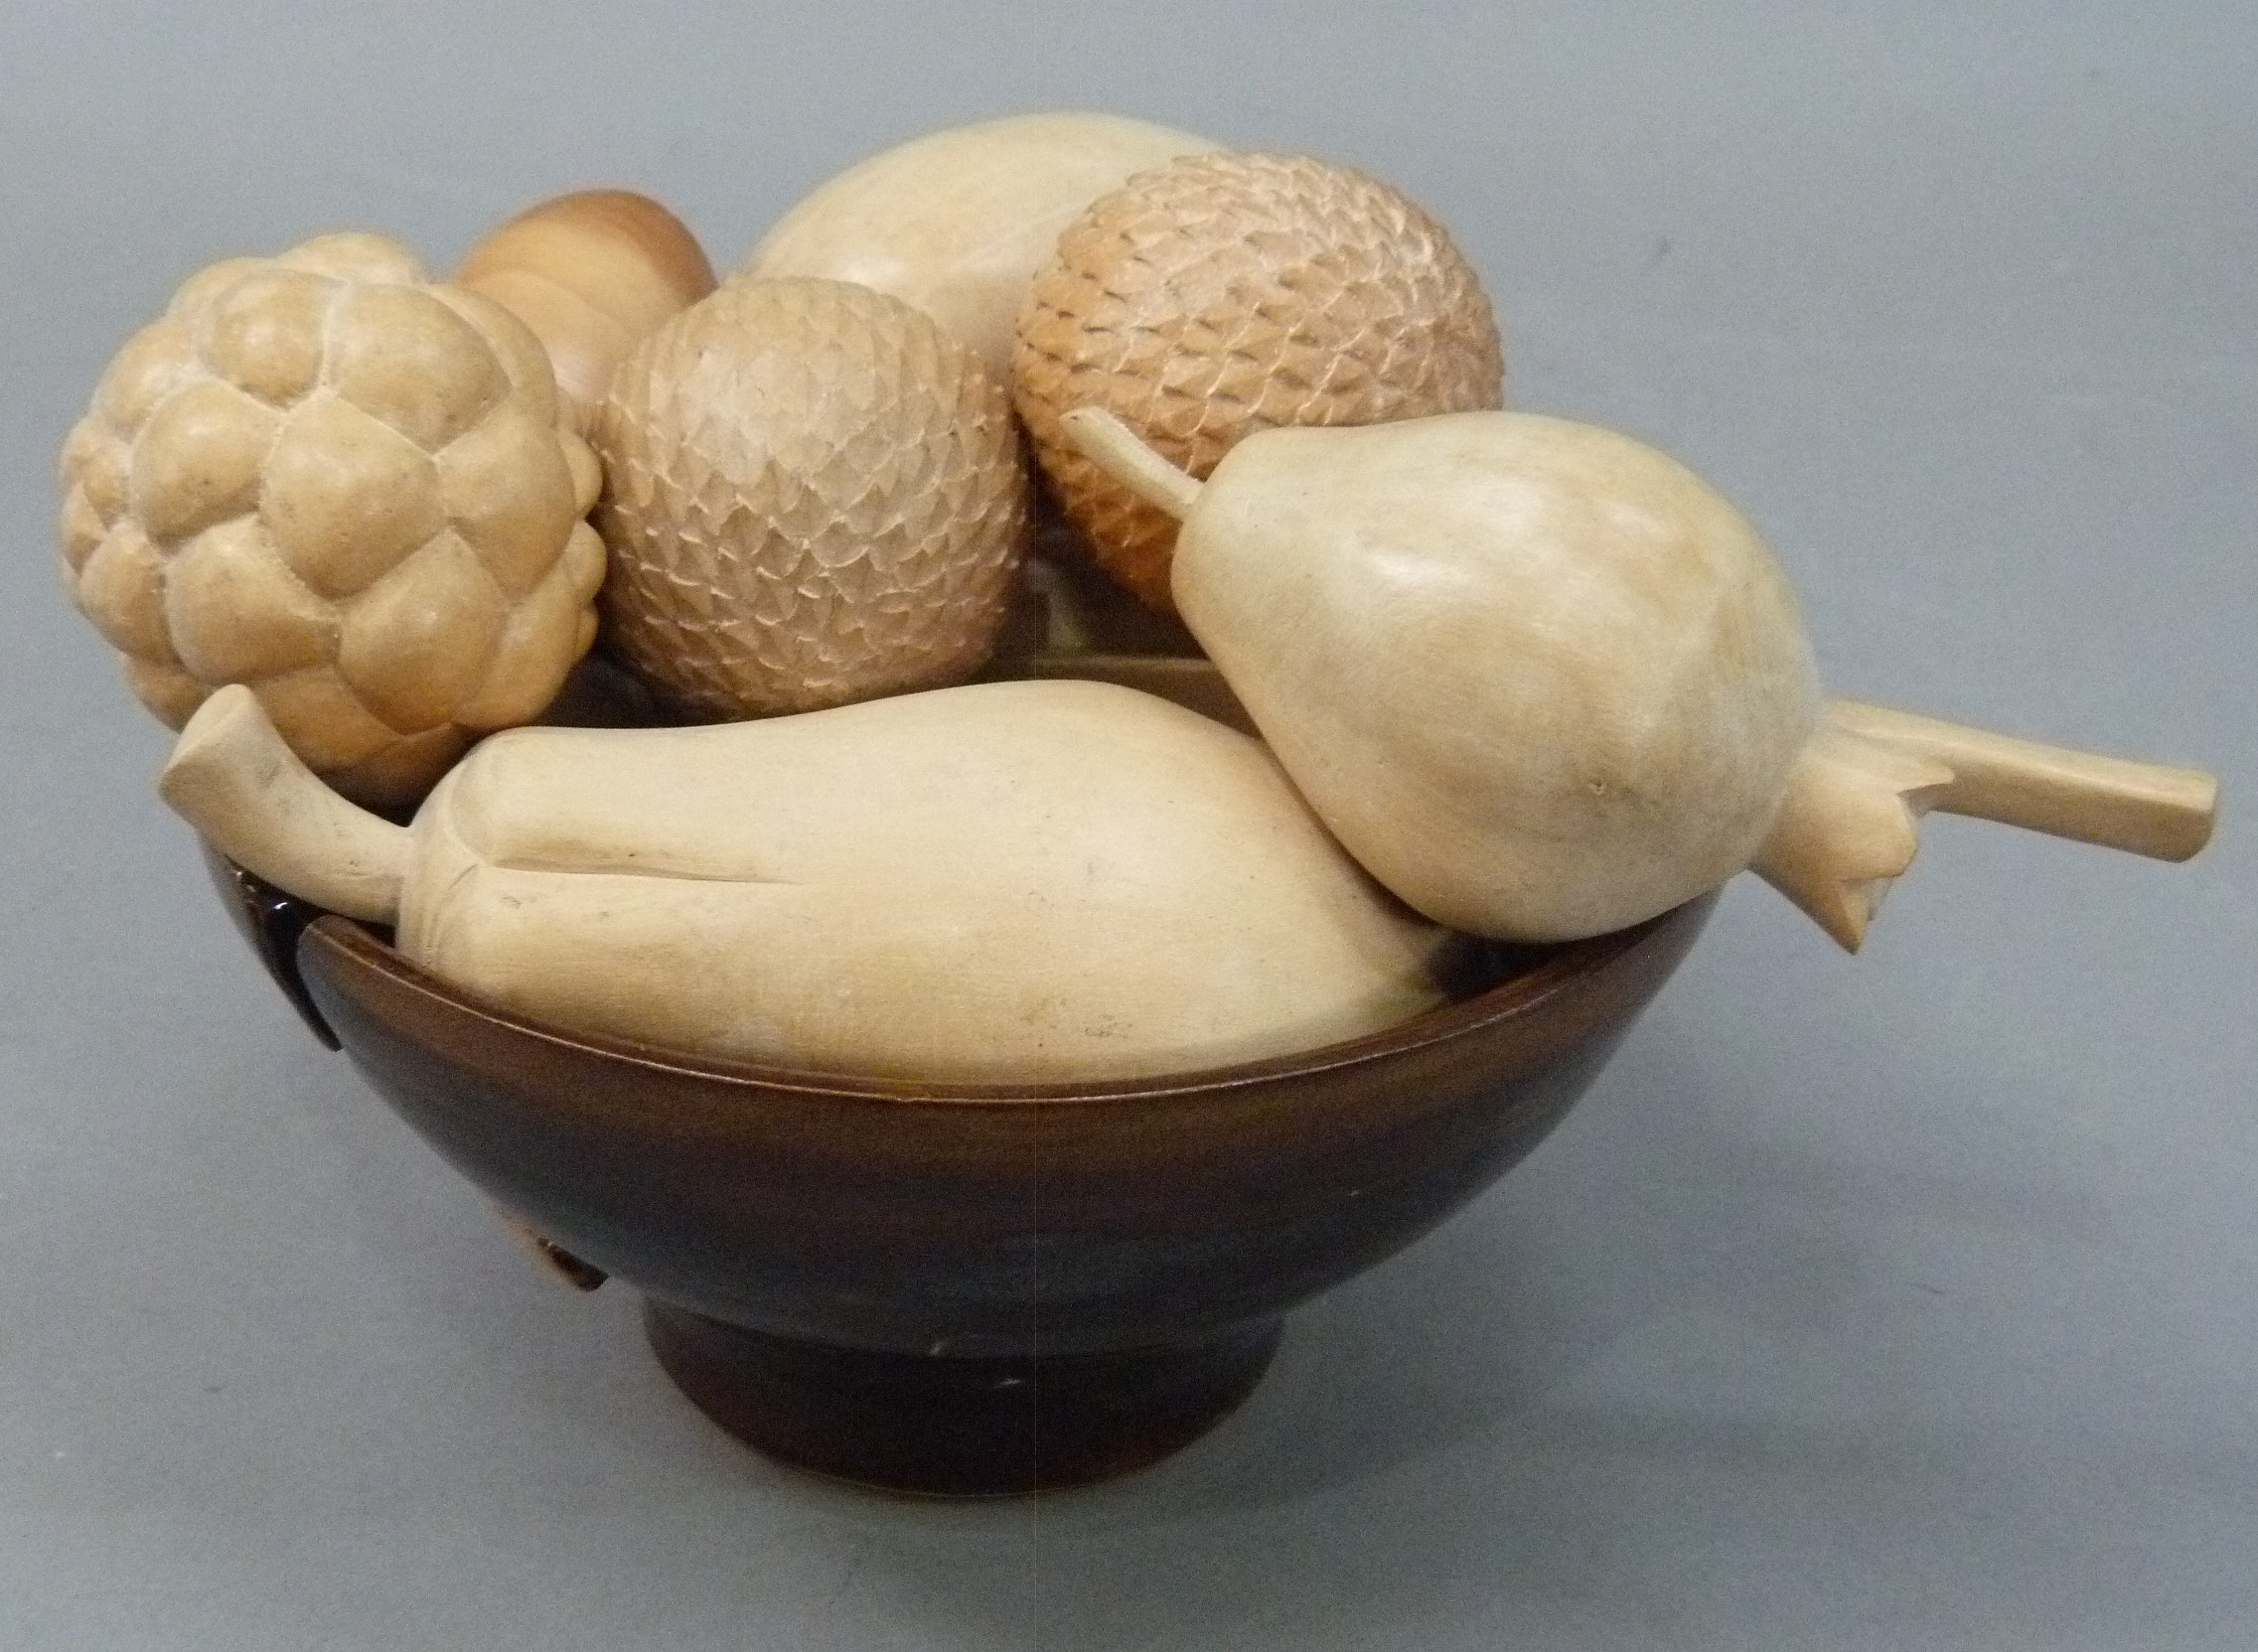 A studio pottery bowl of brown glaze containing a collection of hand carved wooden fruits